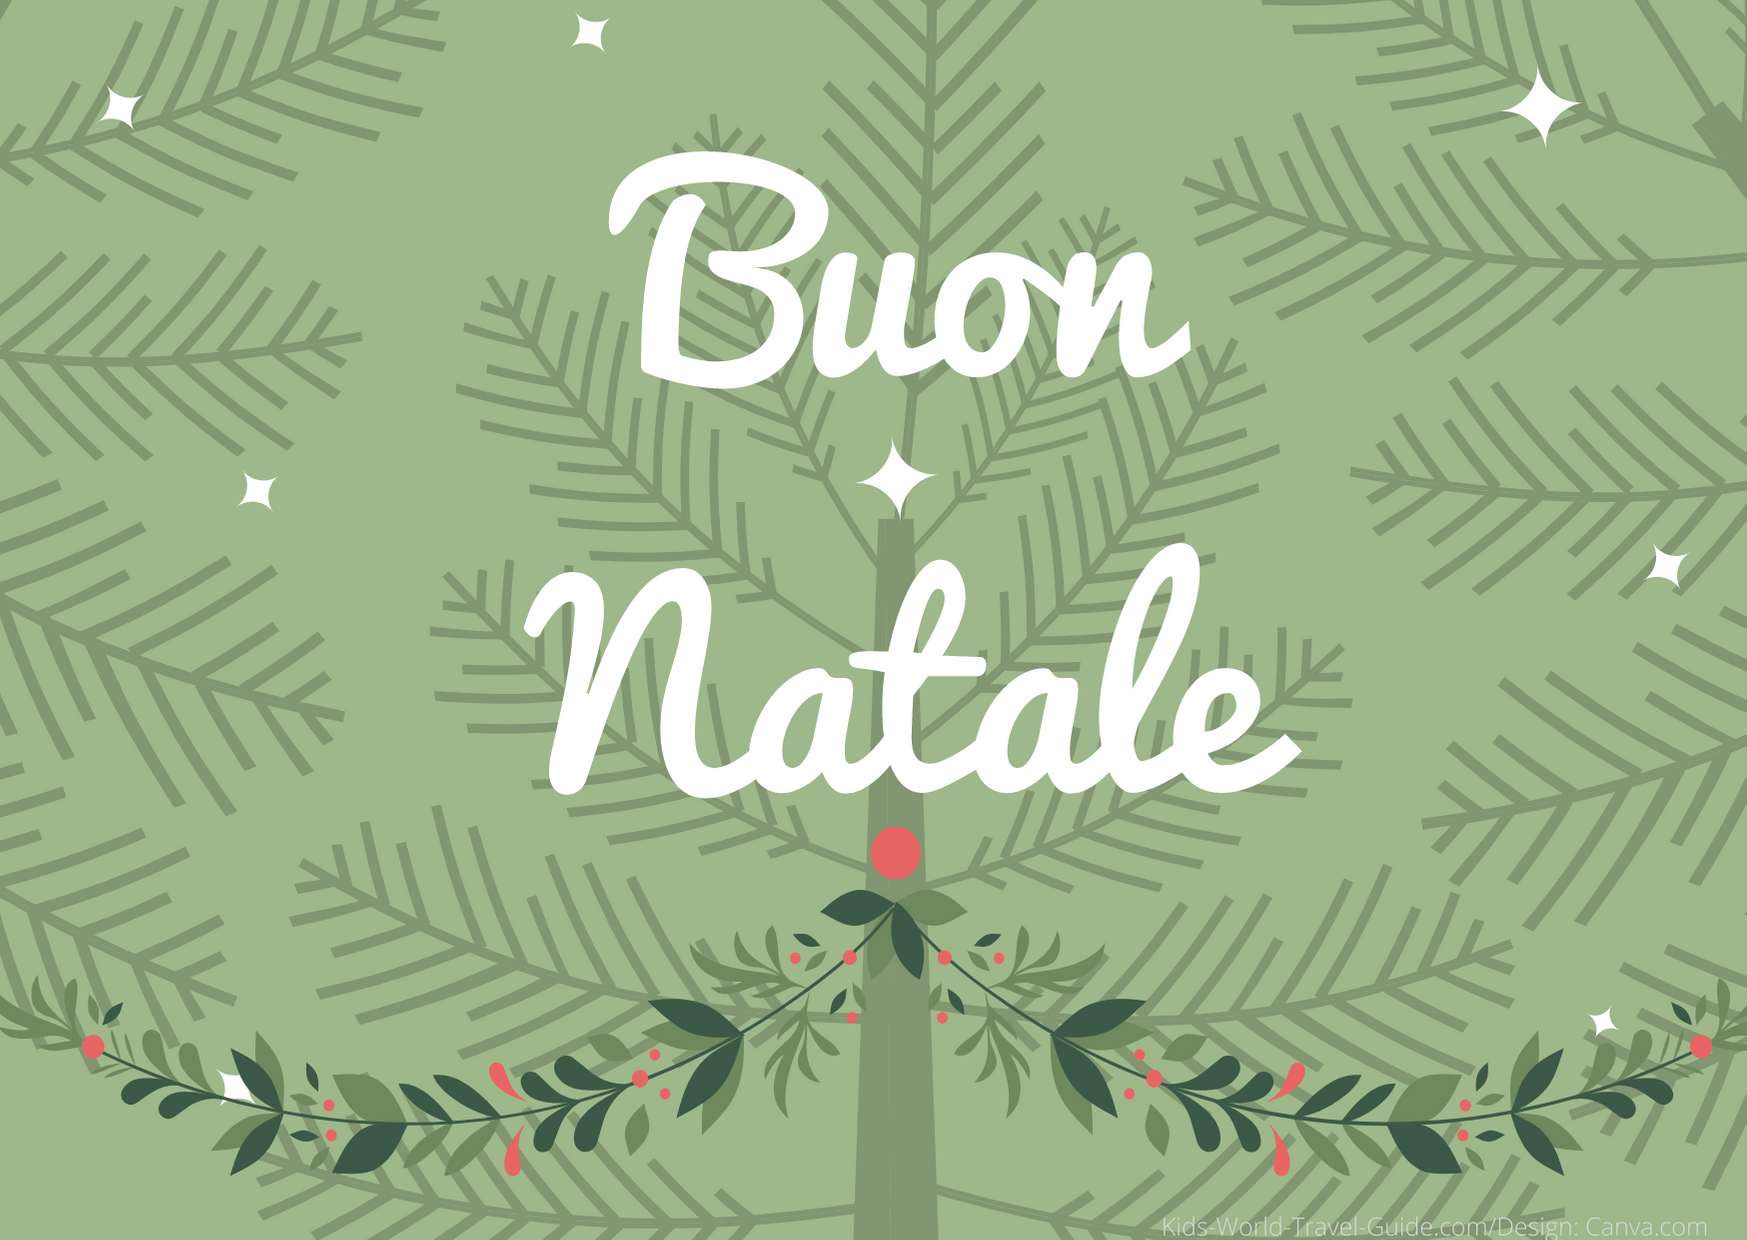 Merry Christmas in different languages: Italian